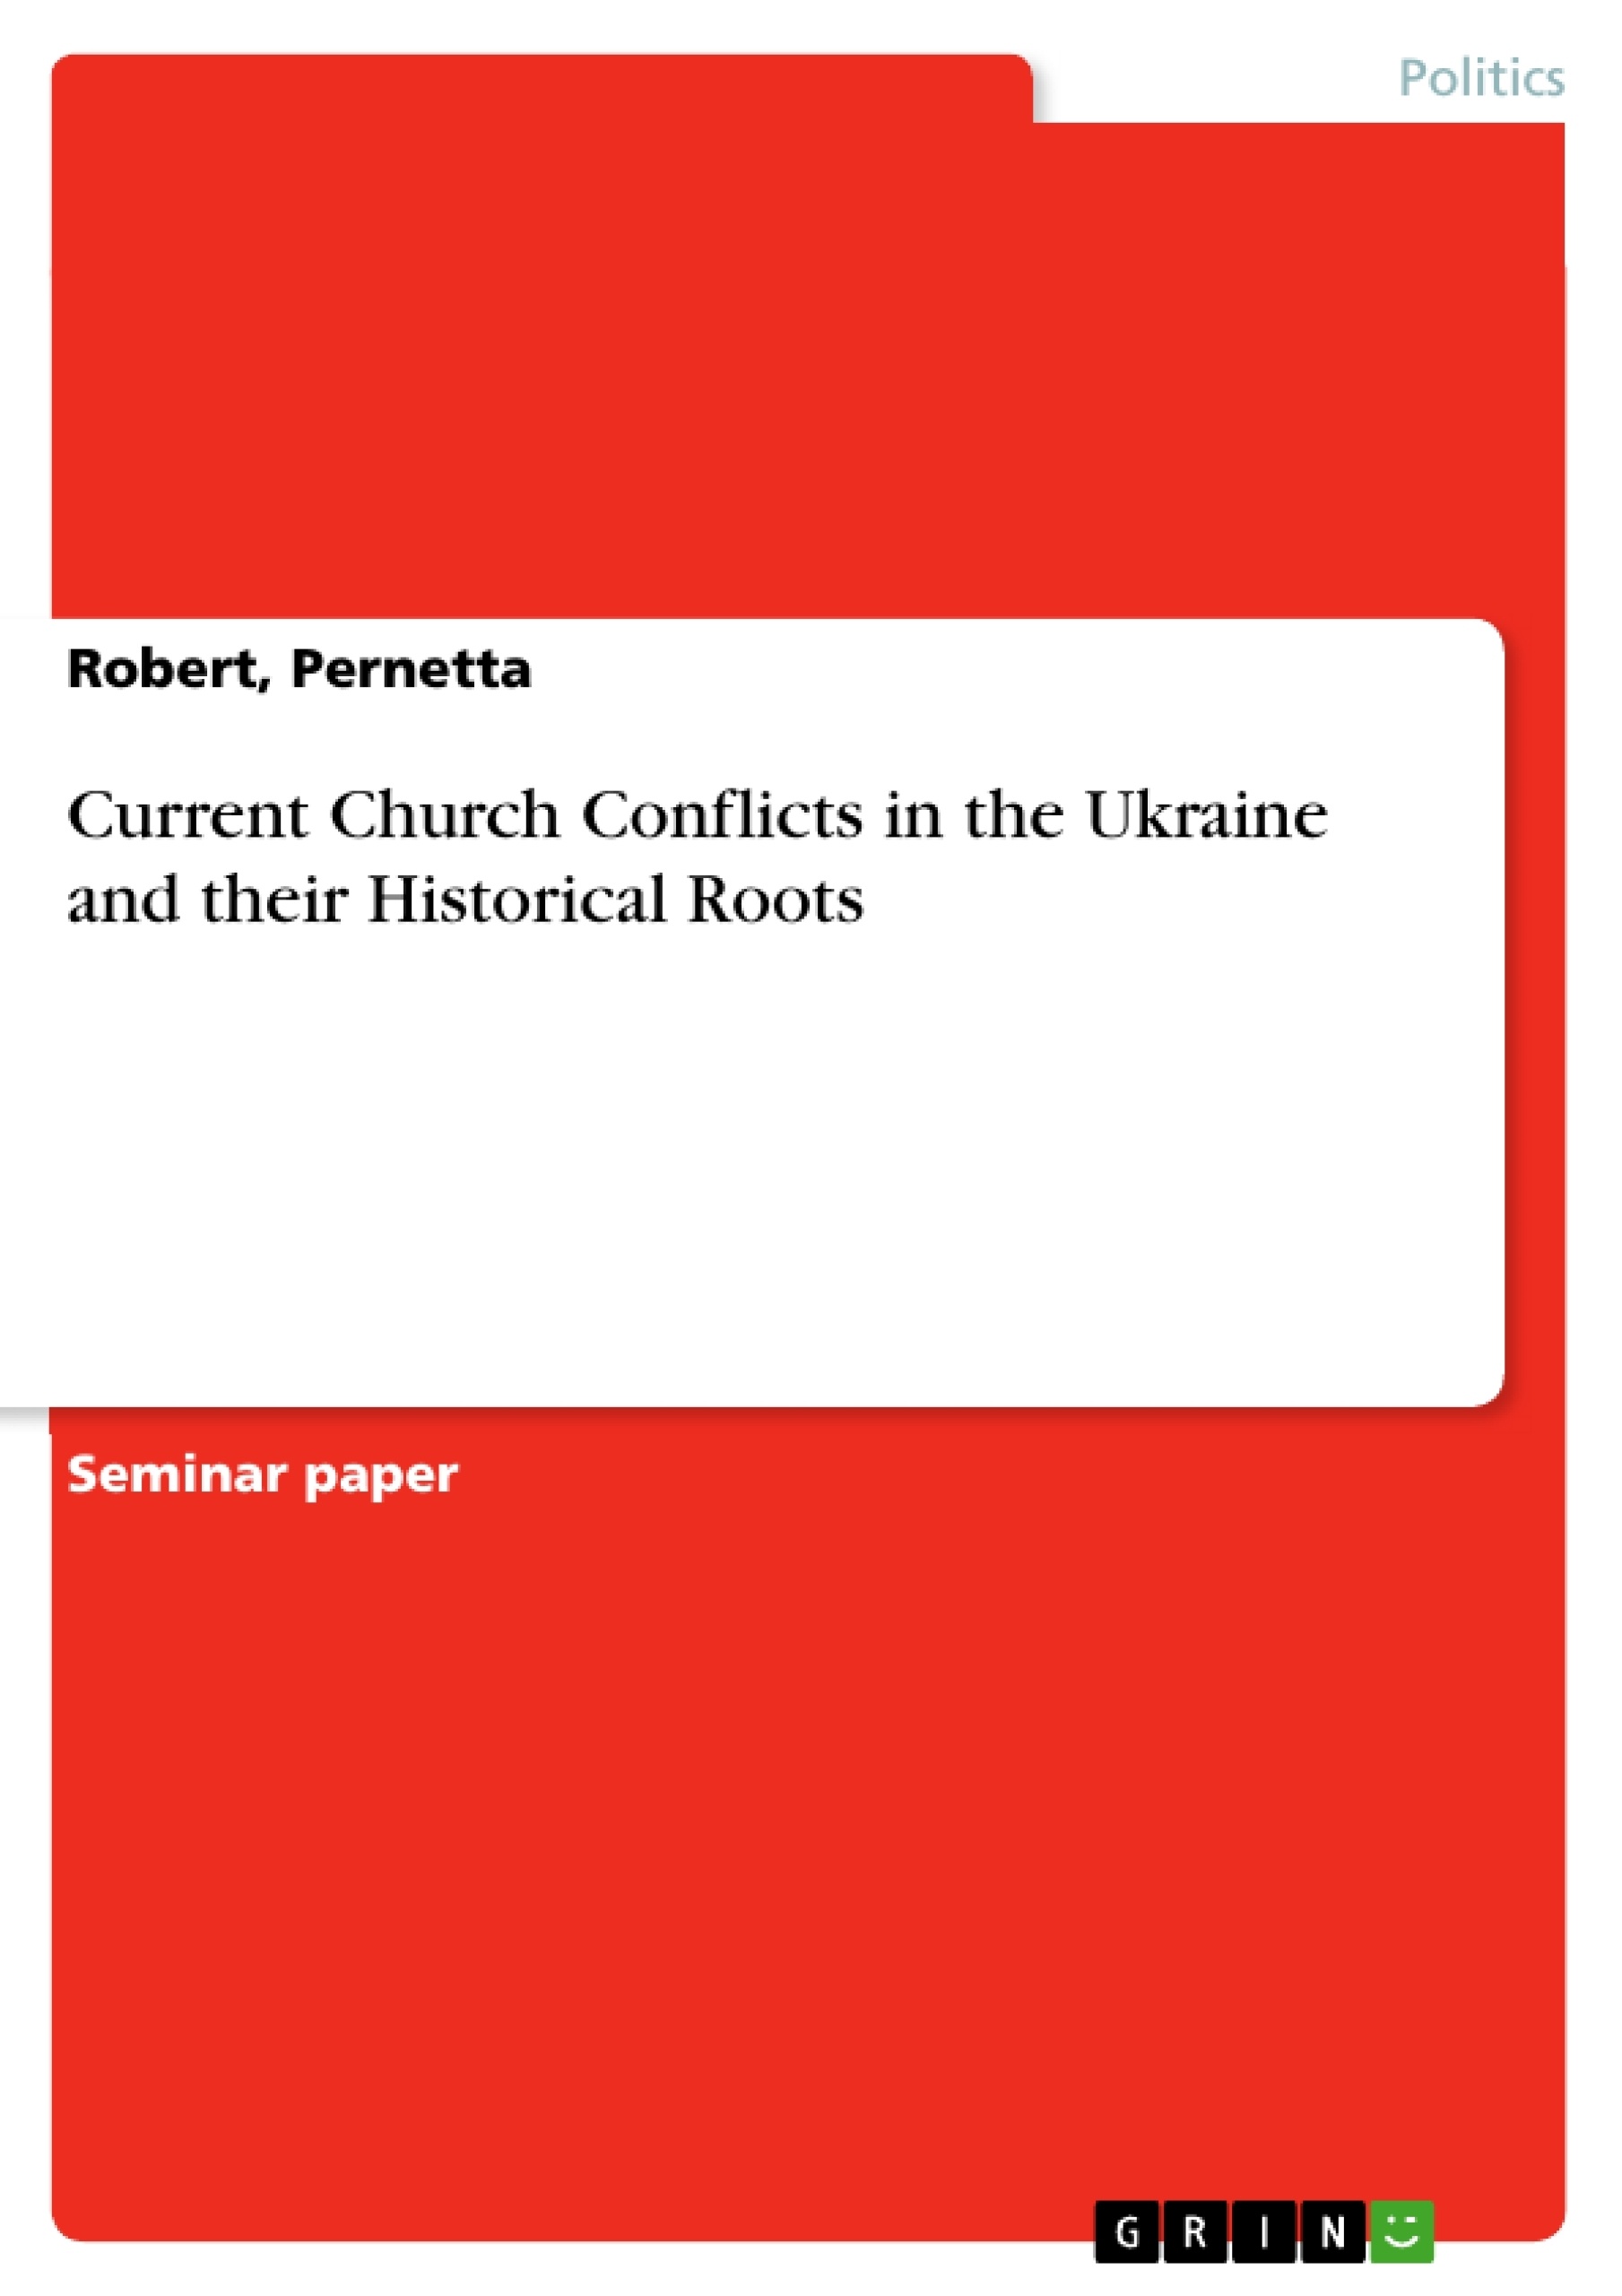 Title: Current Church Conflicts in the Ukraine and their Historical Roots